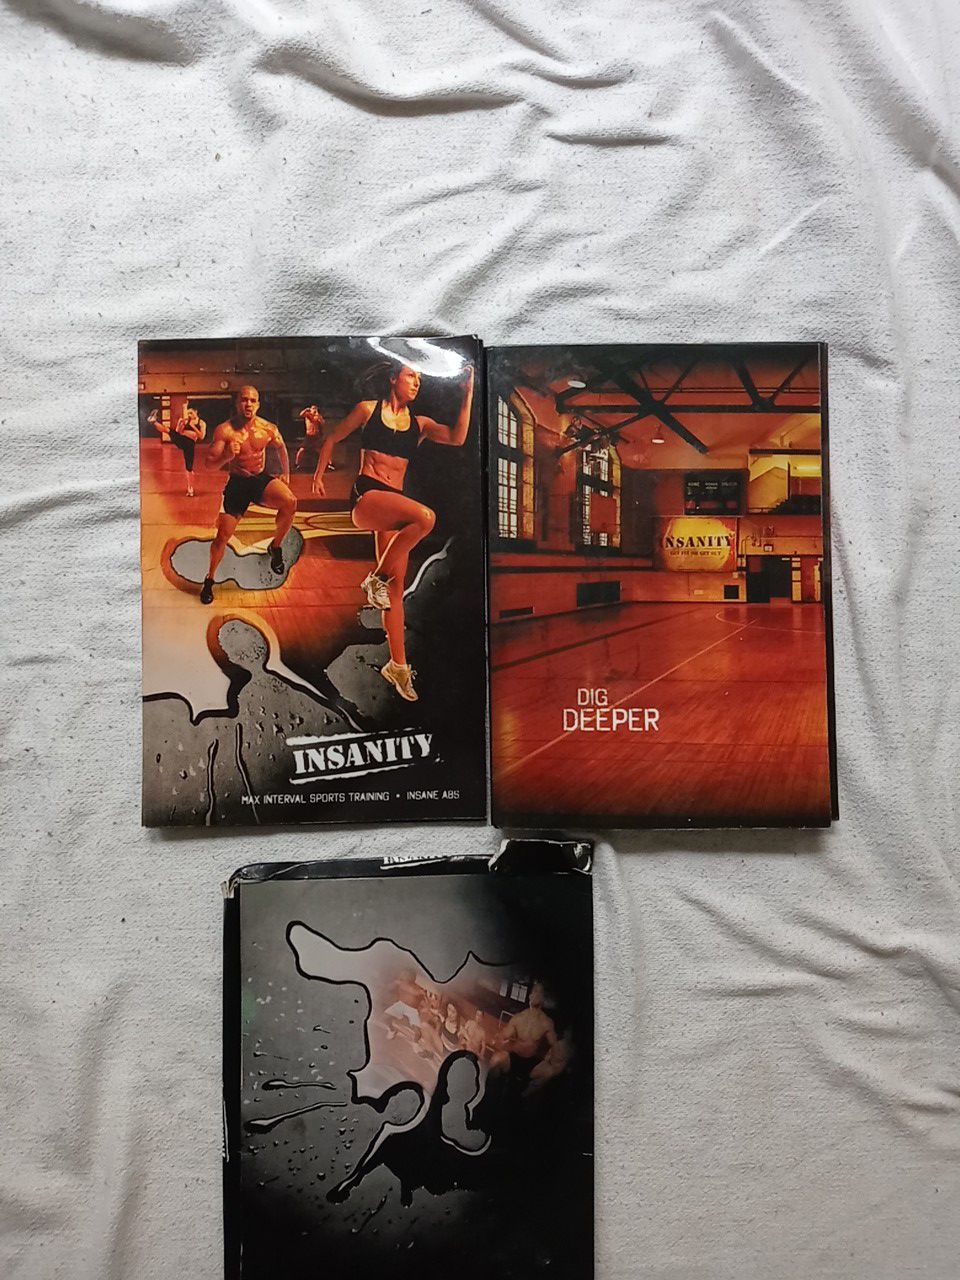 Insanity workout collection DVDs